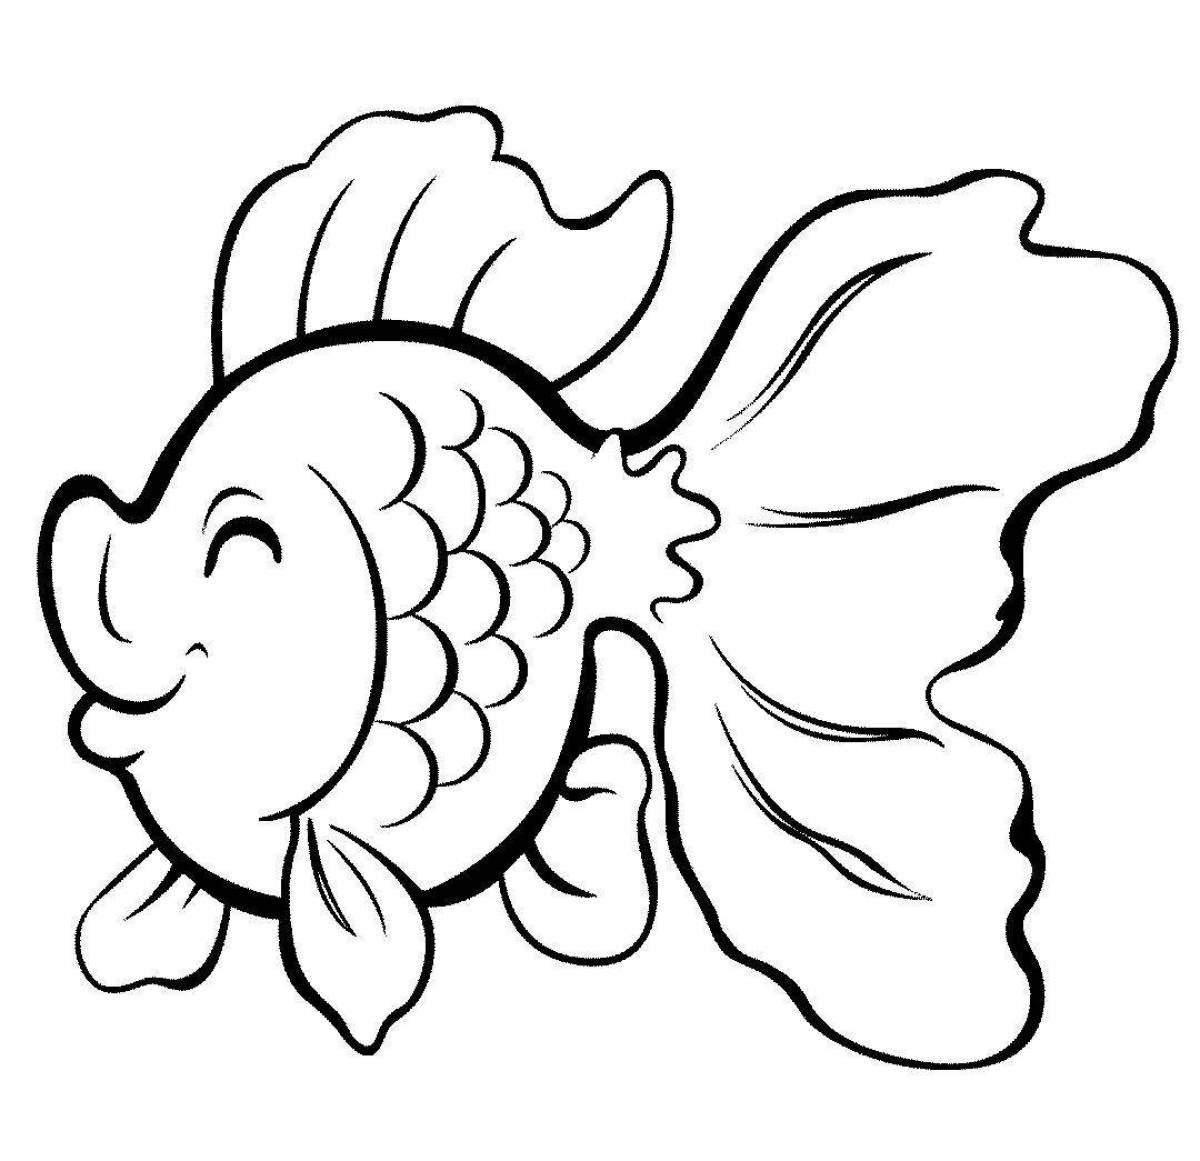 Colourful goldfish coloring book